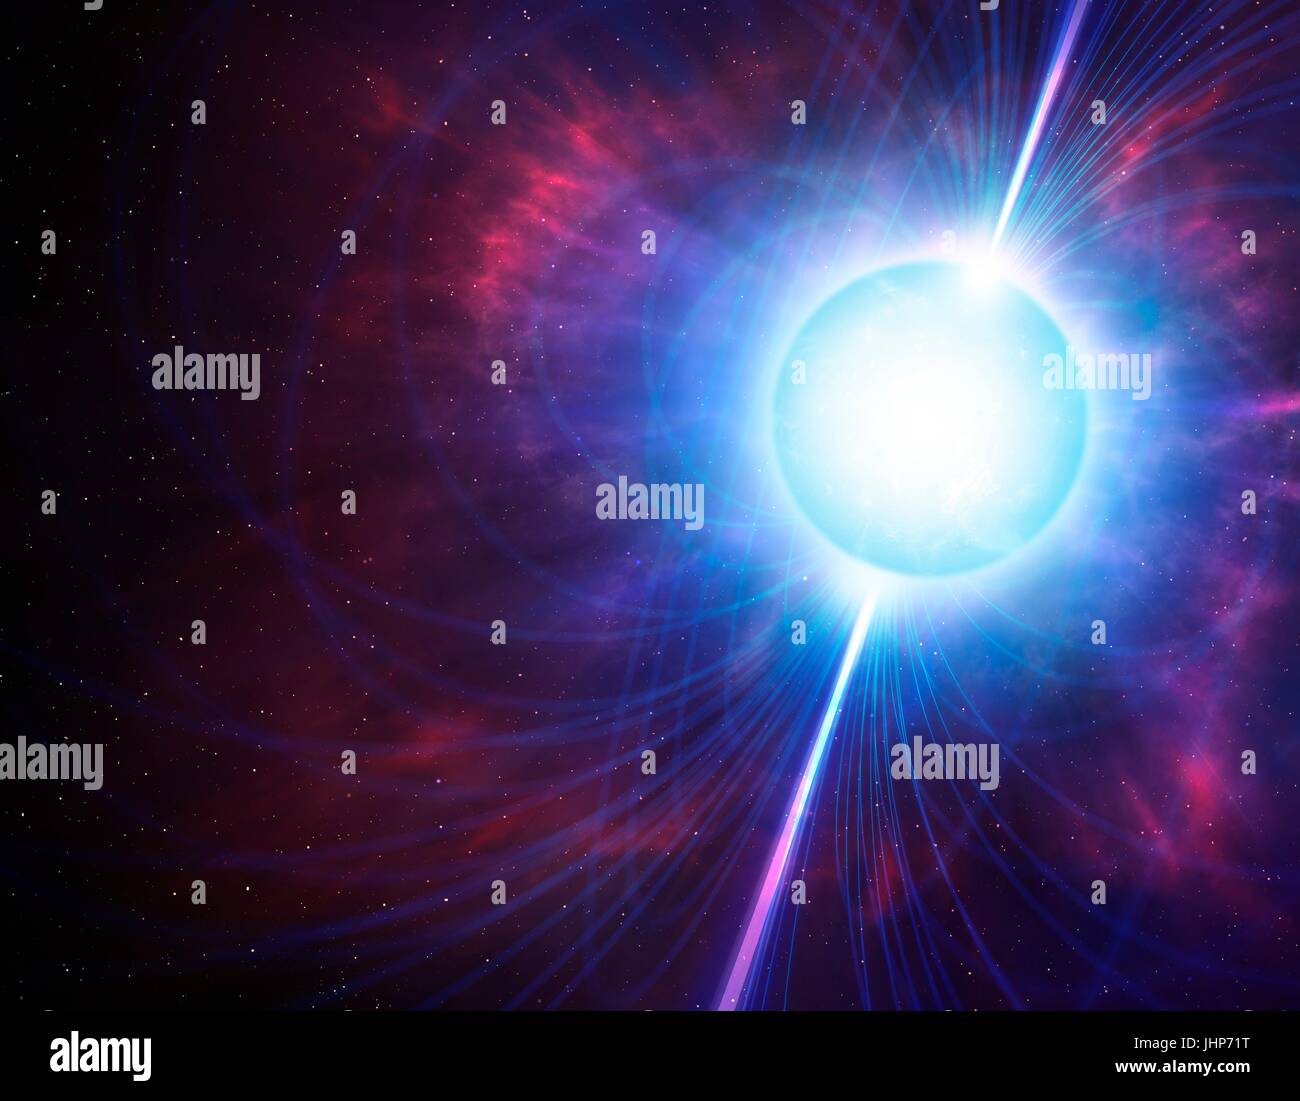 Computer artwork showing the magnetic field (lines) around a magnetar. A magnetar is a type of neutron star with an incredibly strong magnetic field (a million billion times stronger than that of the Earth), which is formed when certain stars undergo supernova explosions. Stock Photo